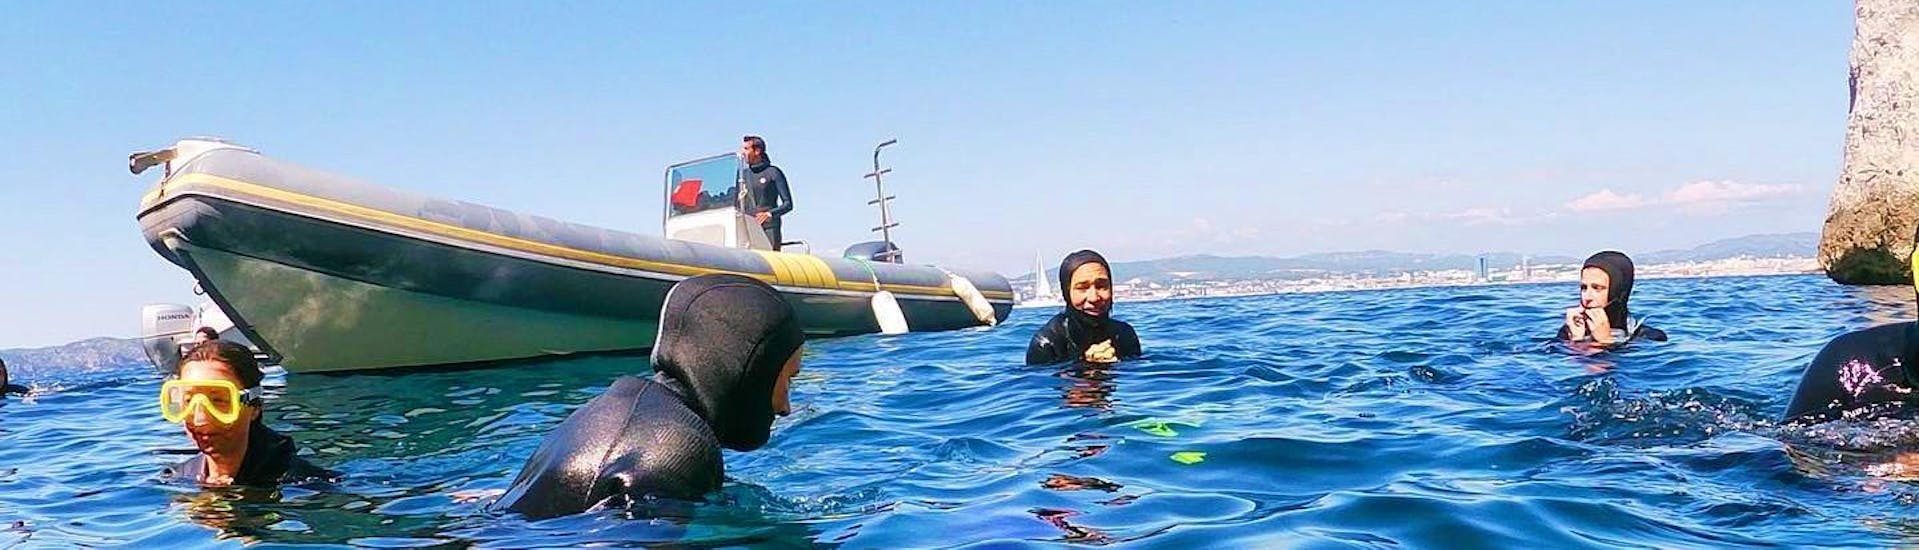 private-snorkeling-trip-in-calanques-national-park-from-marseille-bateau-jaune-hero